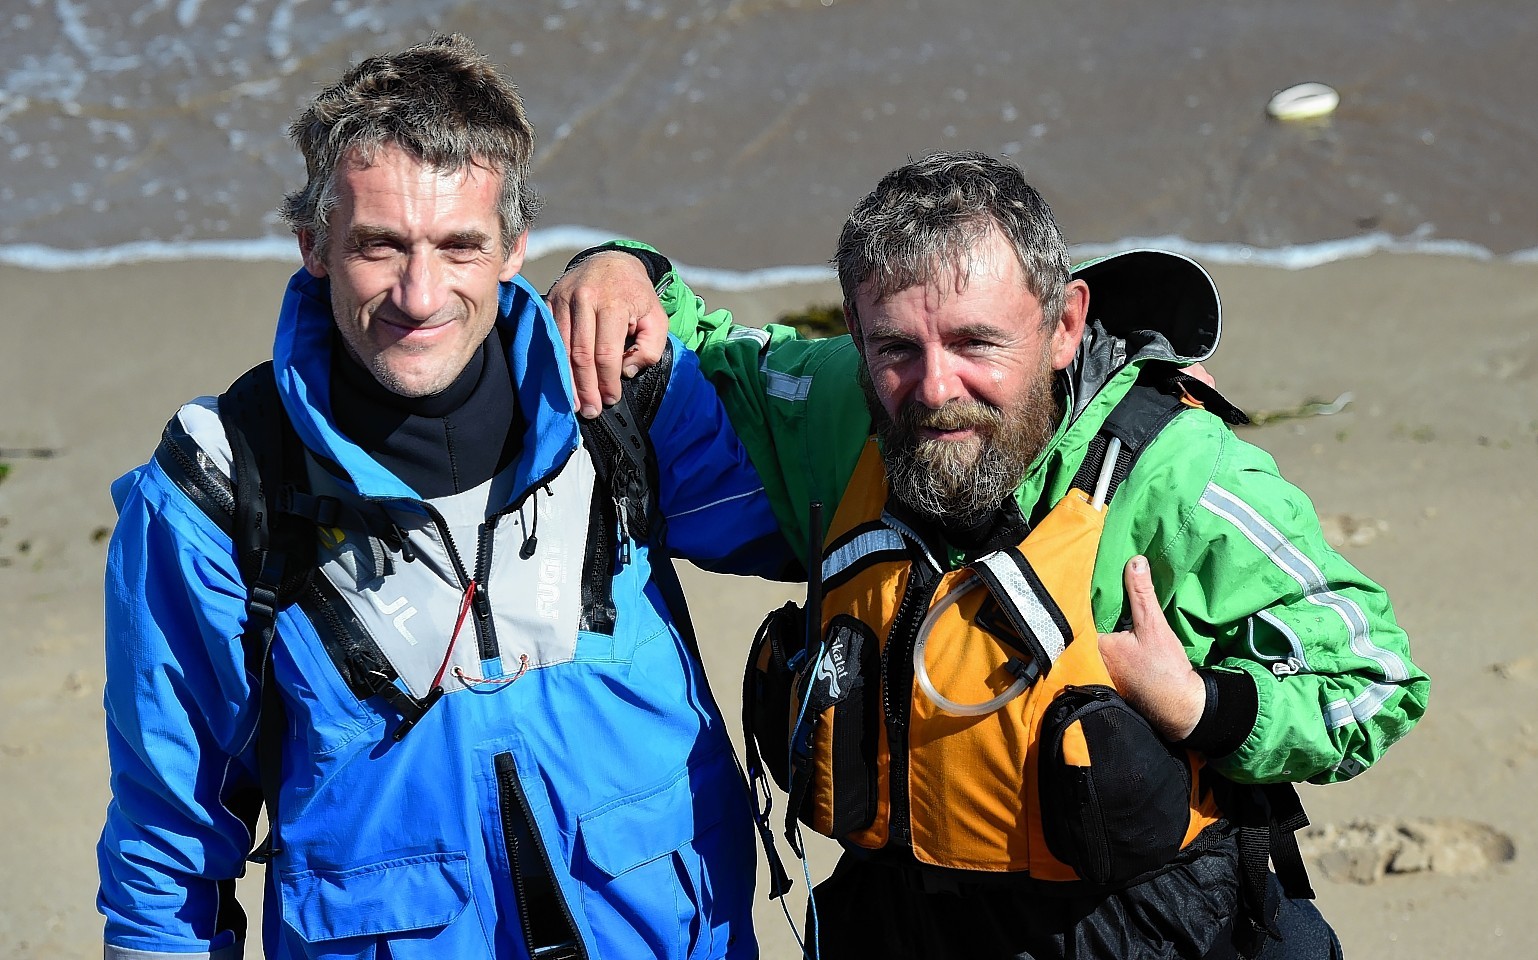 Jono Dunnett (left) who is windsurfing solo around Britain and Nick Ray who is Kayaking solo around Scotland